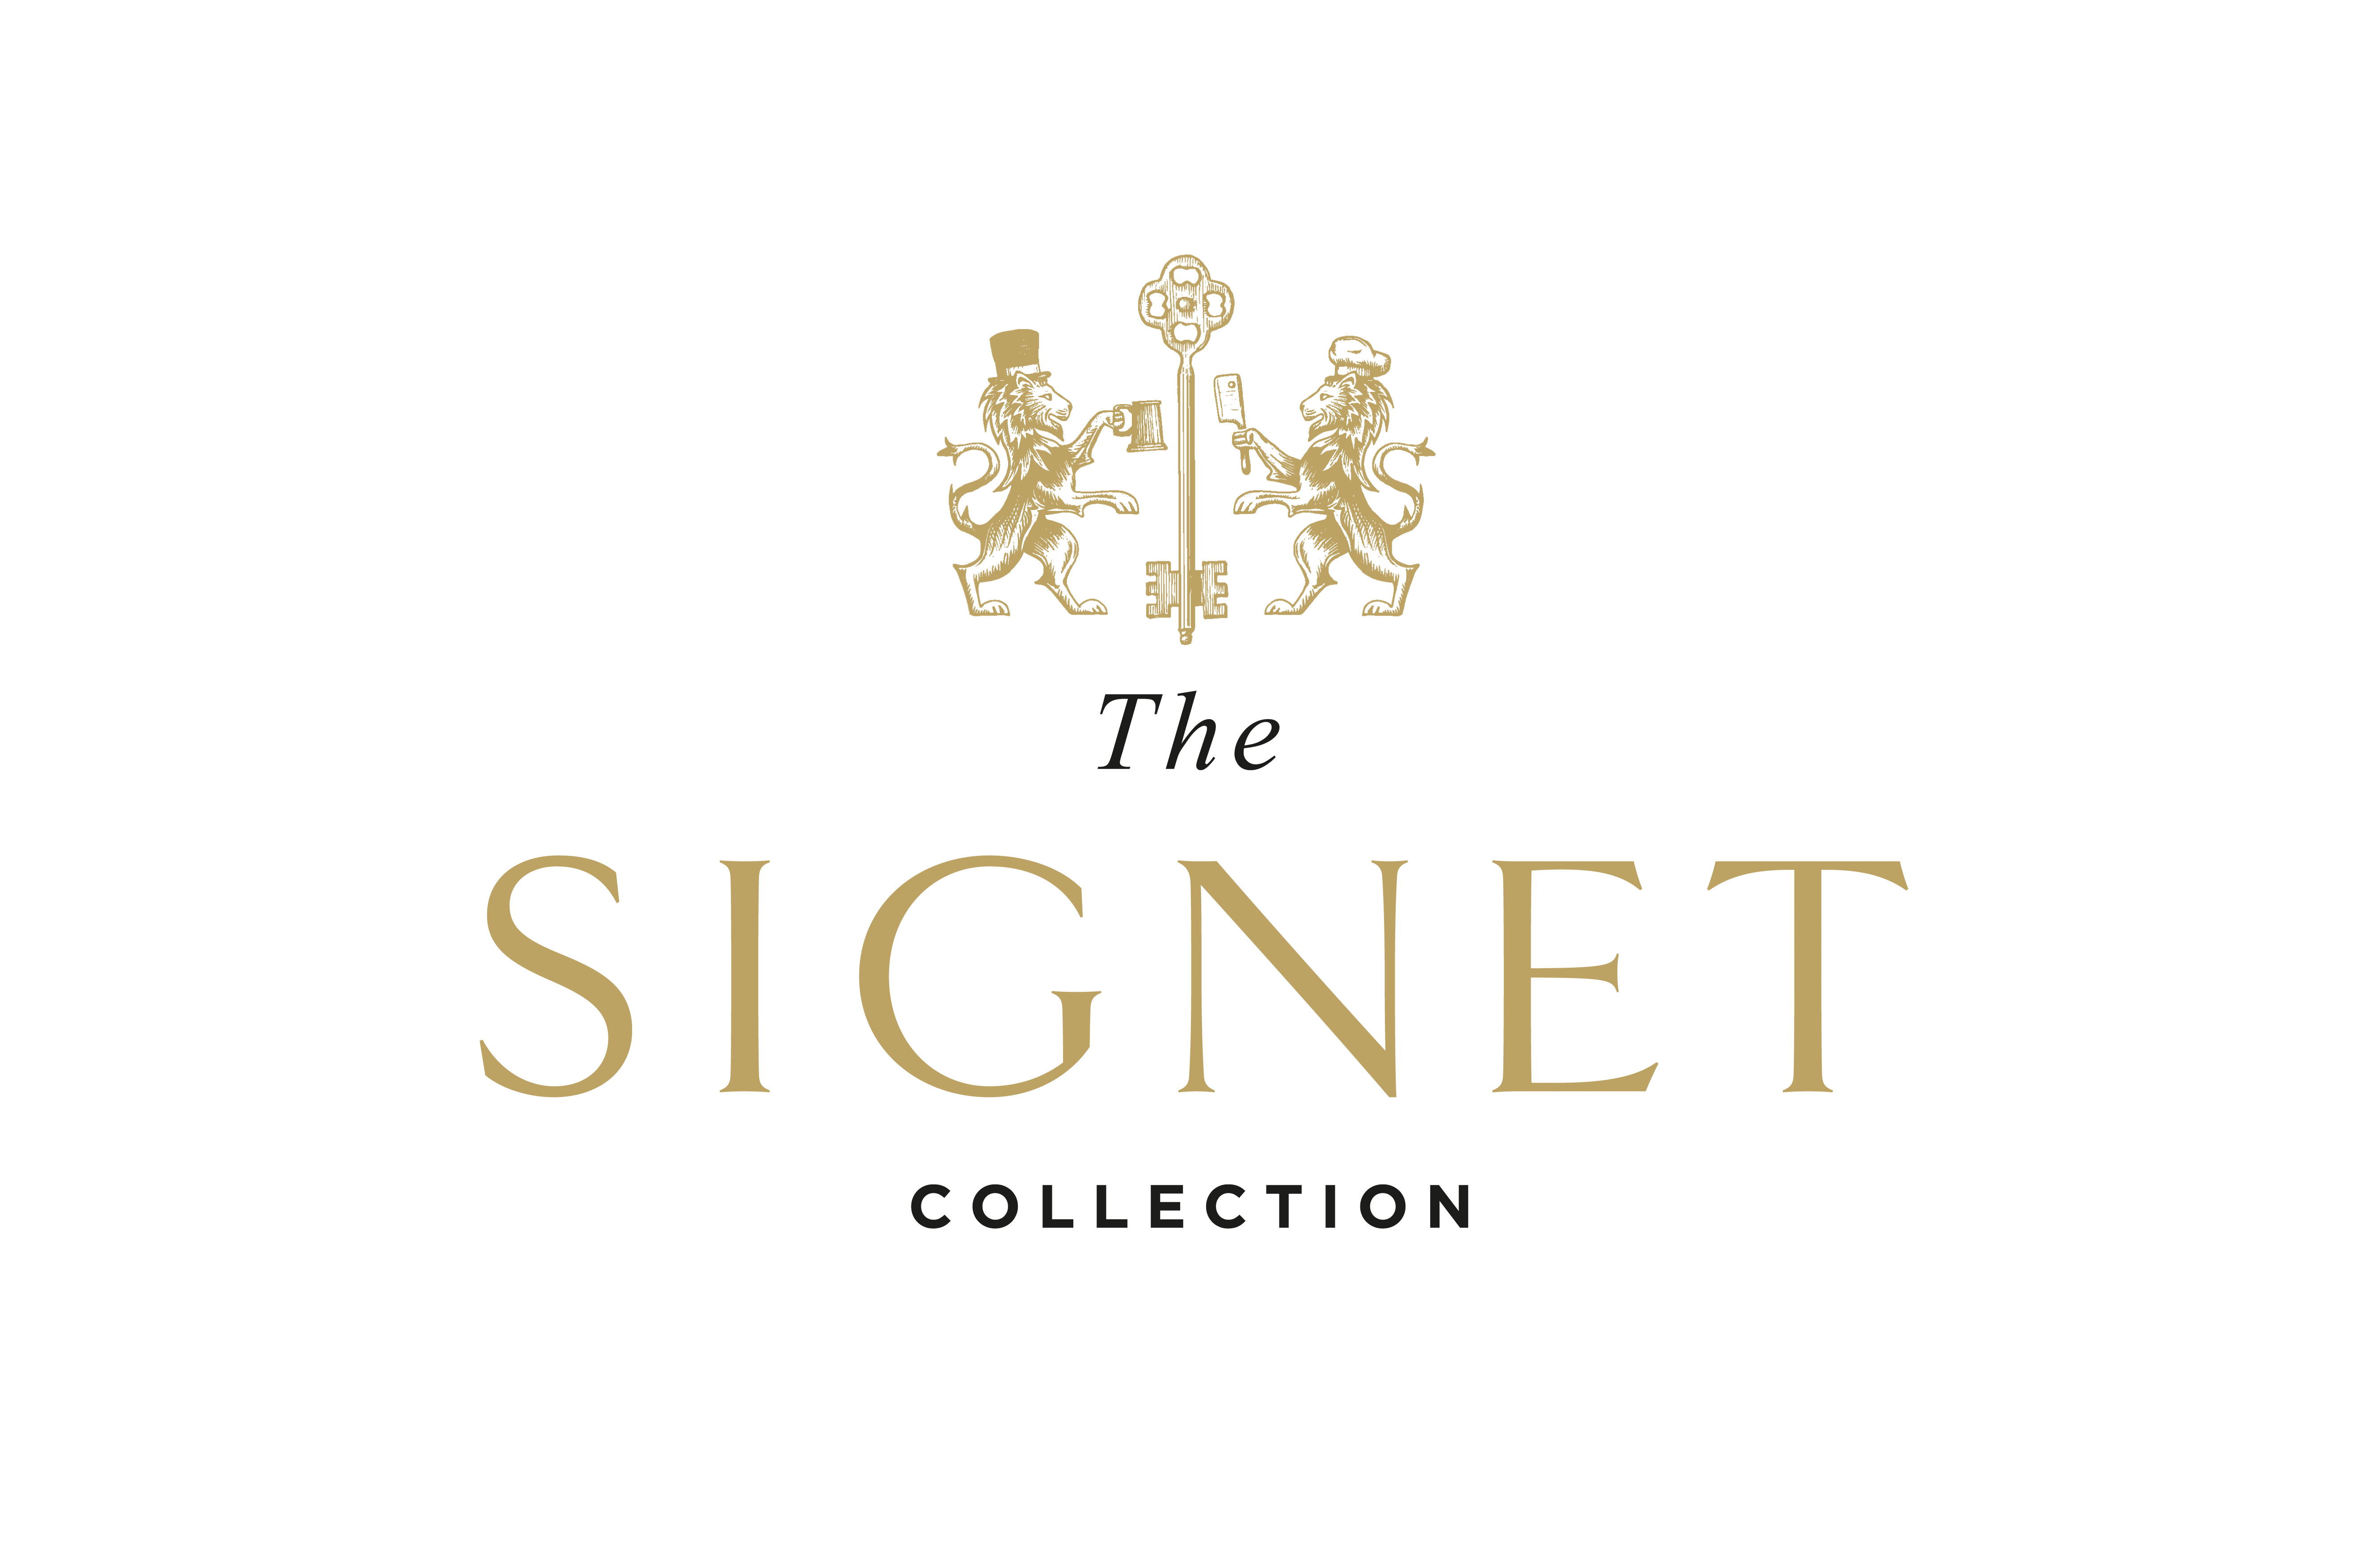 signet-gold-text-large.png?quality=50